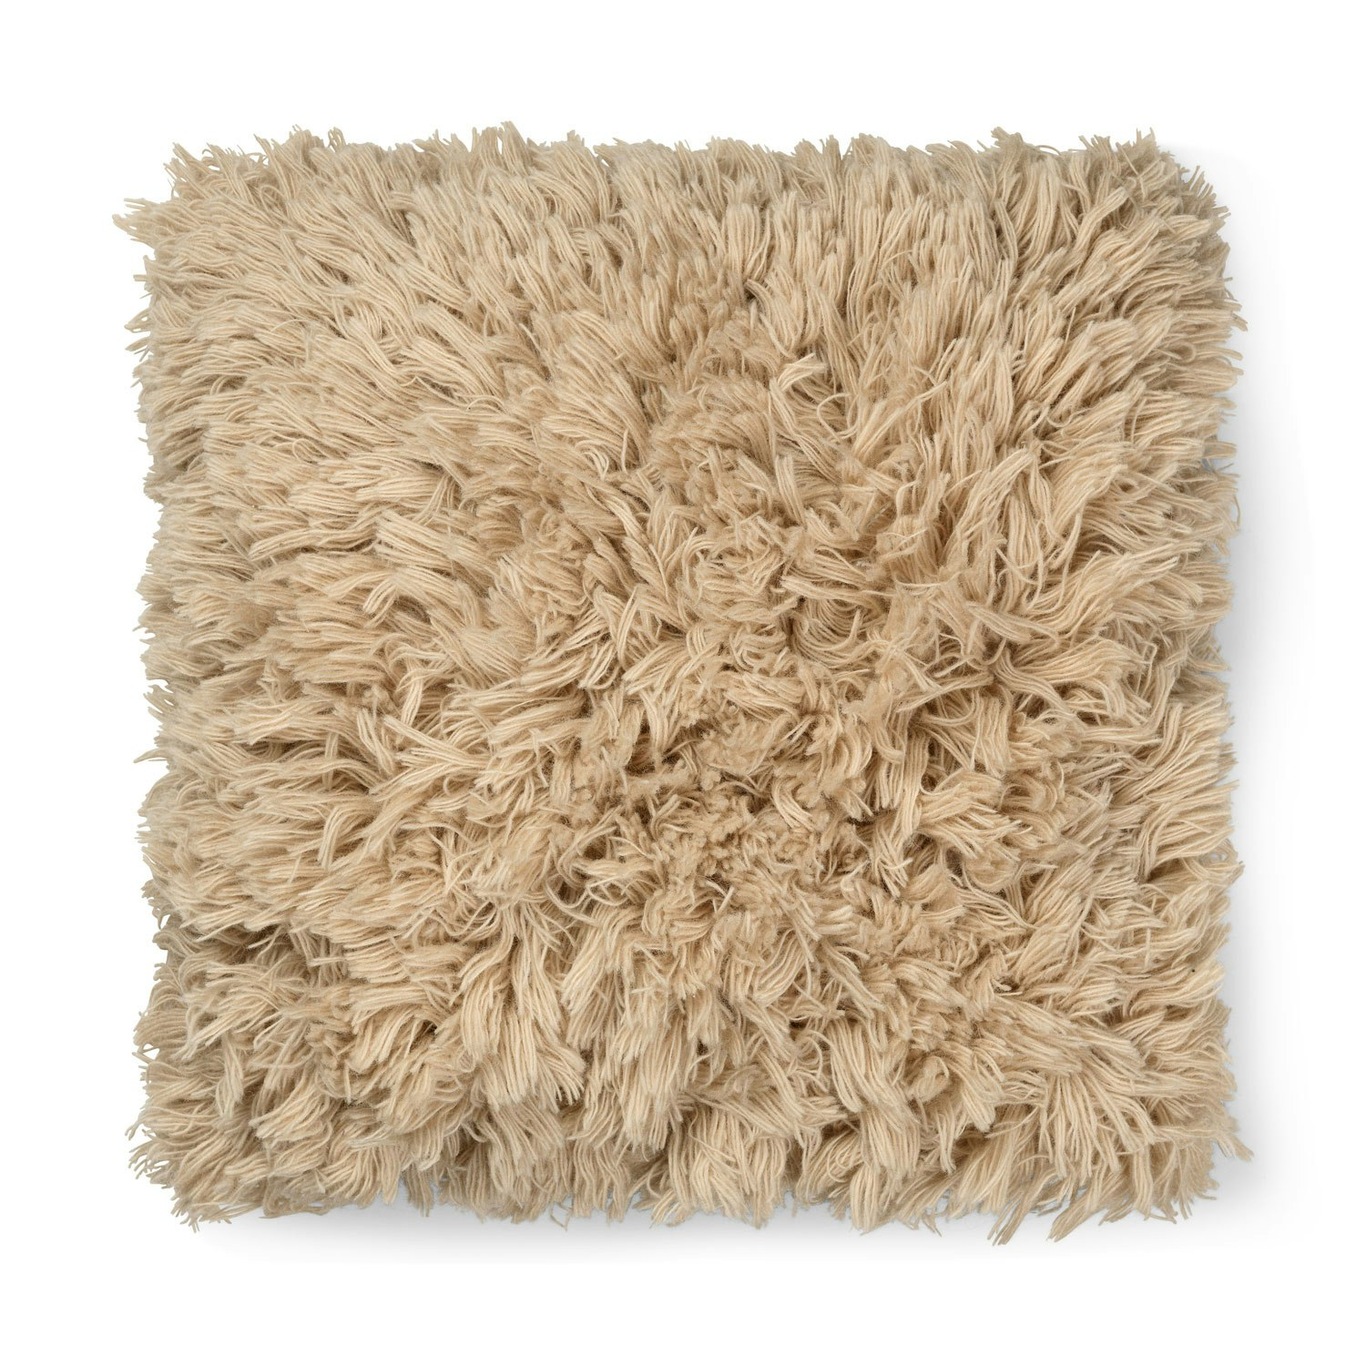 Meadow High Pile Scatter Cushion 50x50 cm, Light Sand